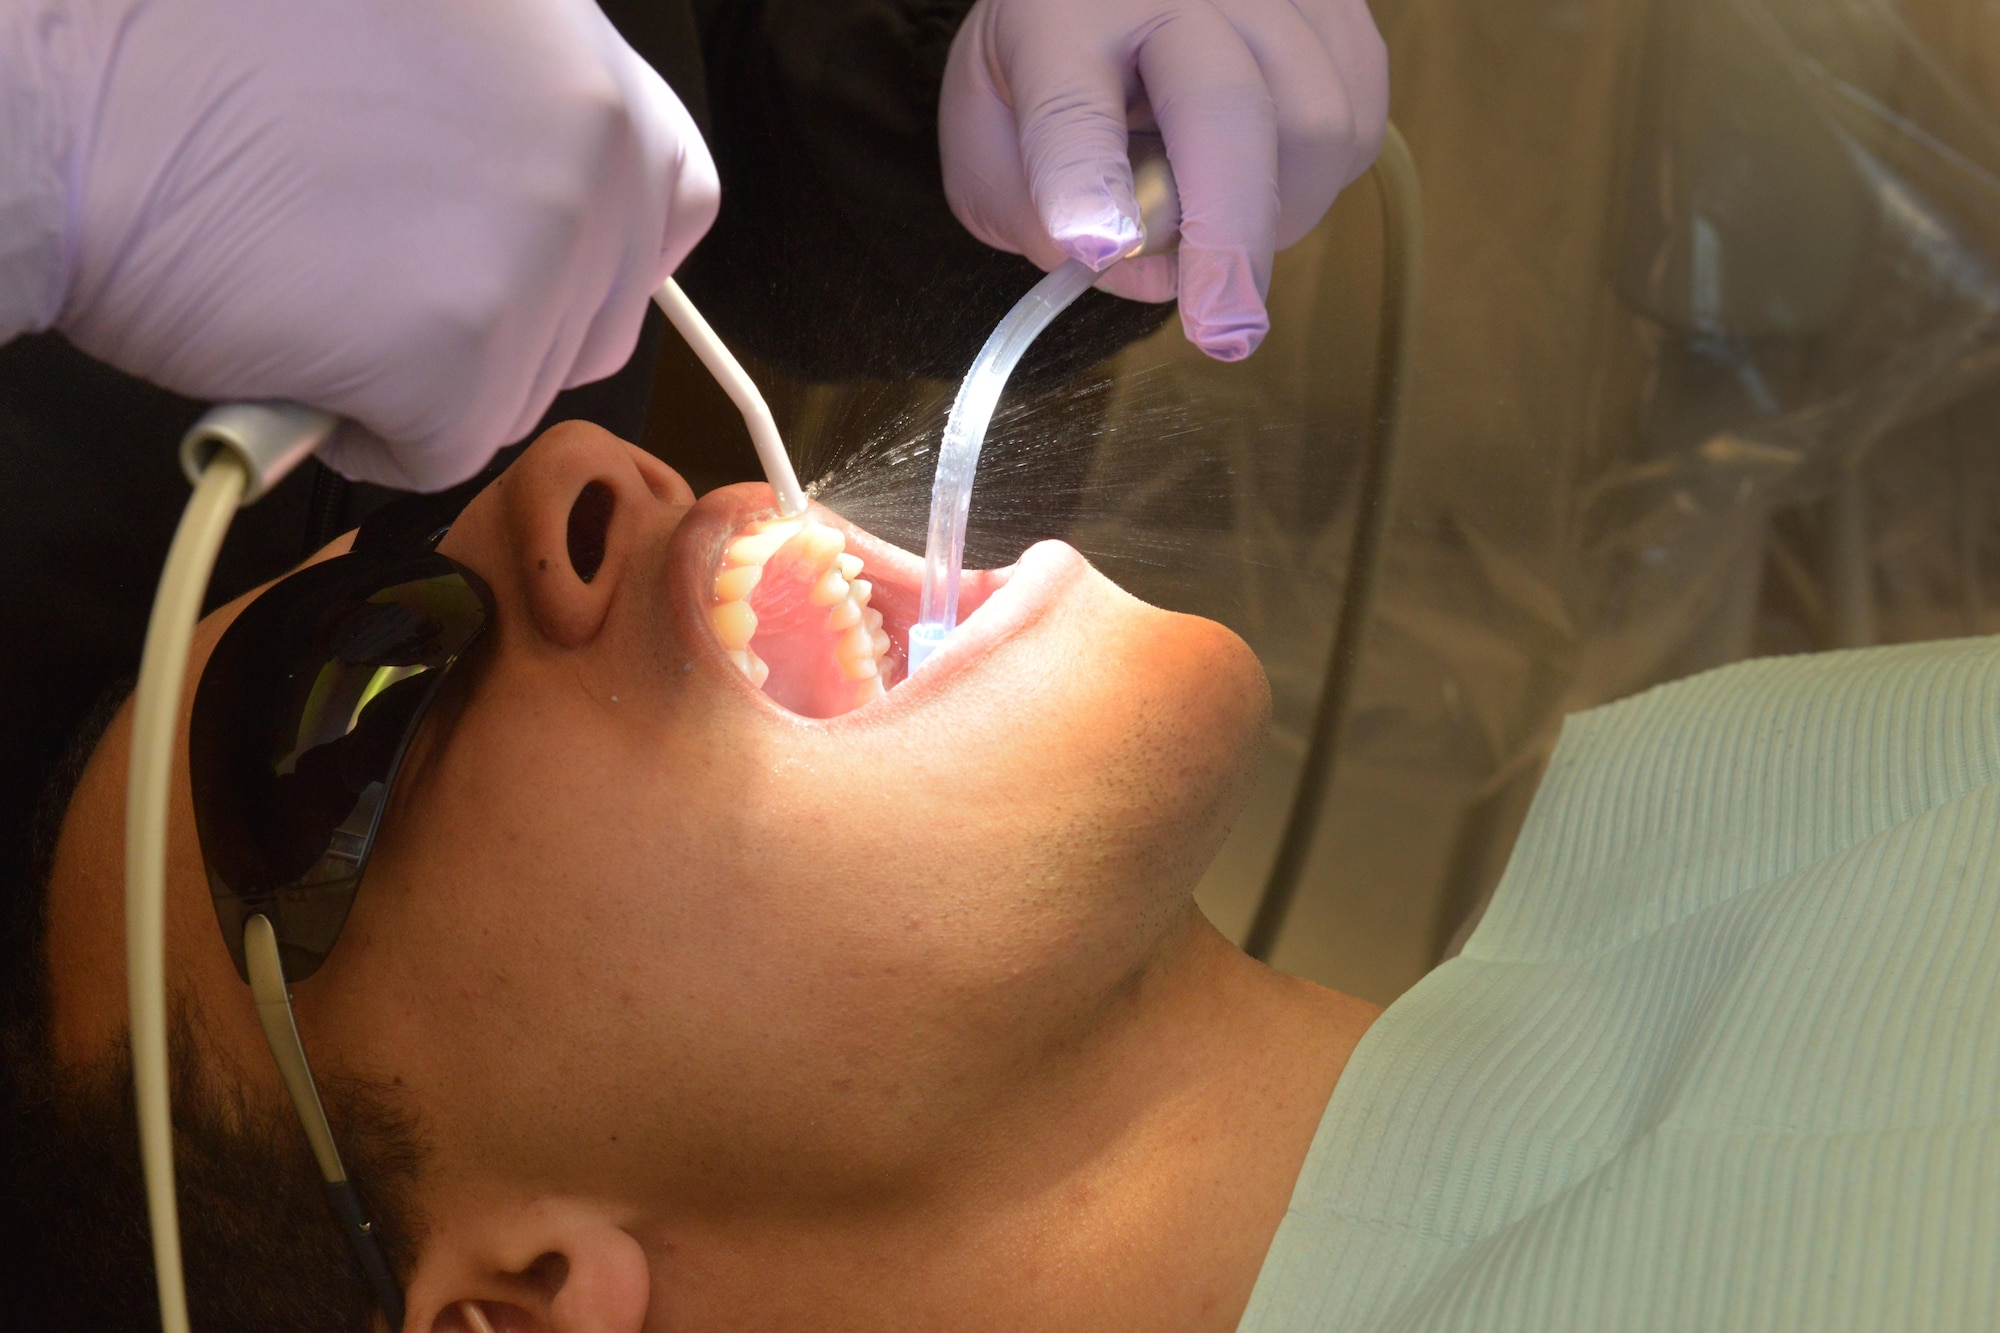 An Airman receives a dental cleaning at Minot Air Force Base, N.D., Jan. 10, 2017. Dental polishing removes stains, plaque accumulation and increases aesthetics. (U.S. Air Force photo/Airman 1st Class Jessica Weissman)